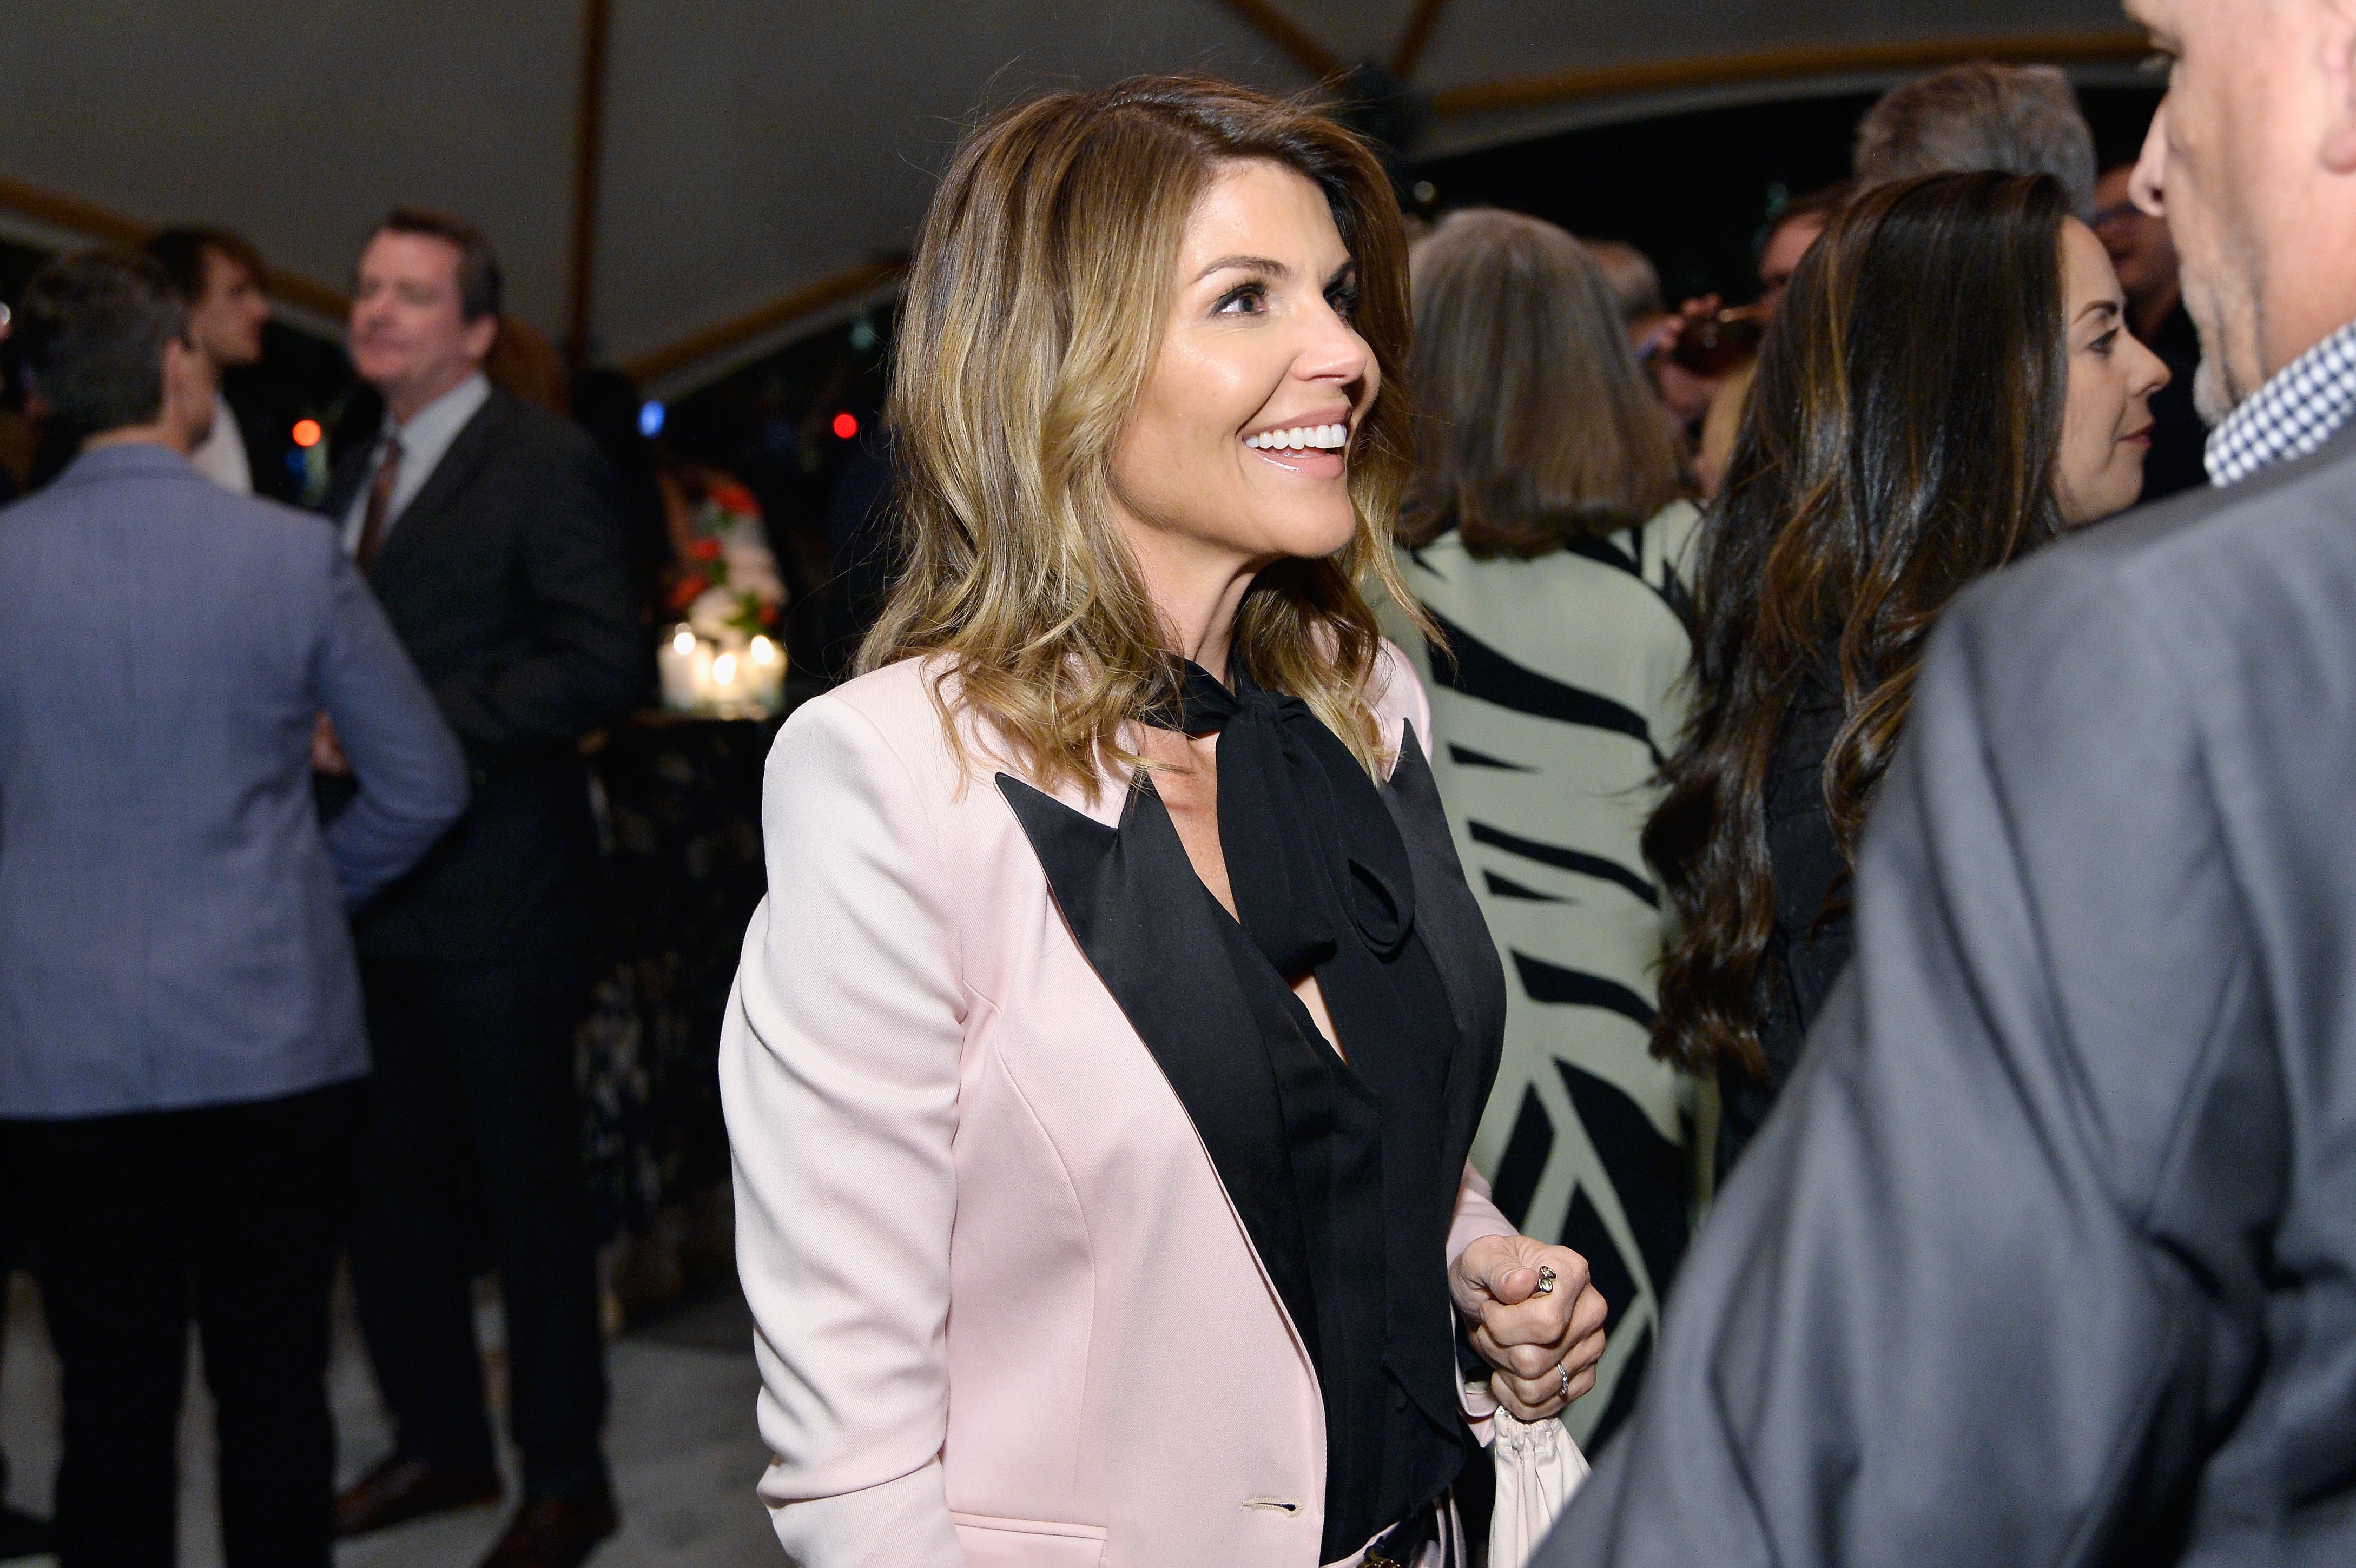  Lori Loughlin at the Netflix 2019 Nominees Toast  in Los Angeles, California | Photo: Getty Images